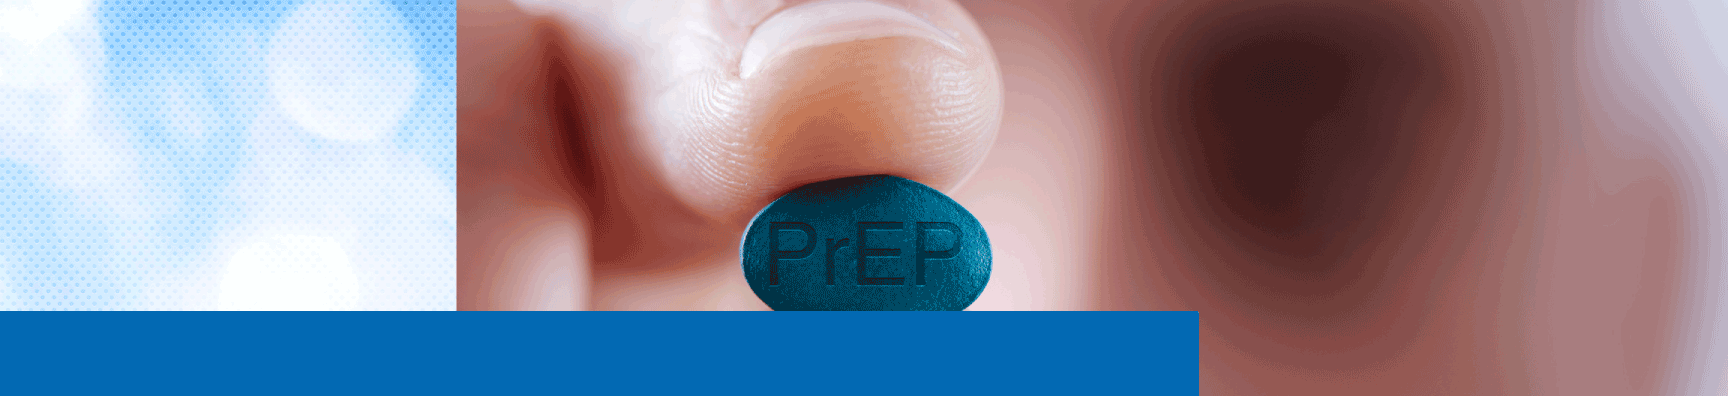 About PrEP